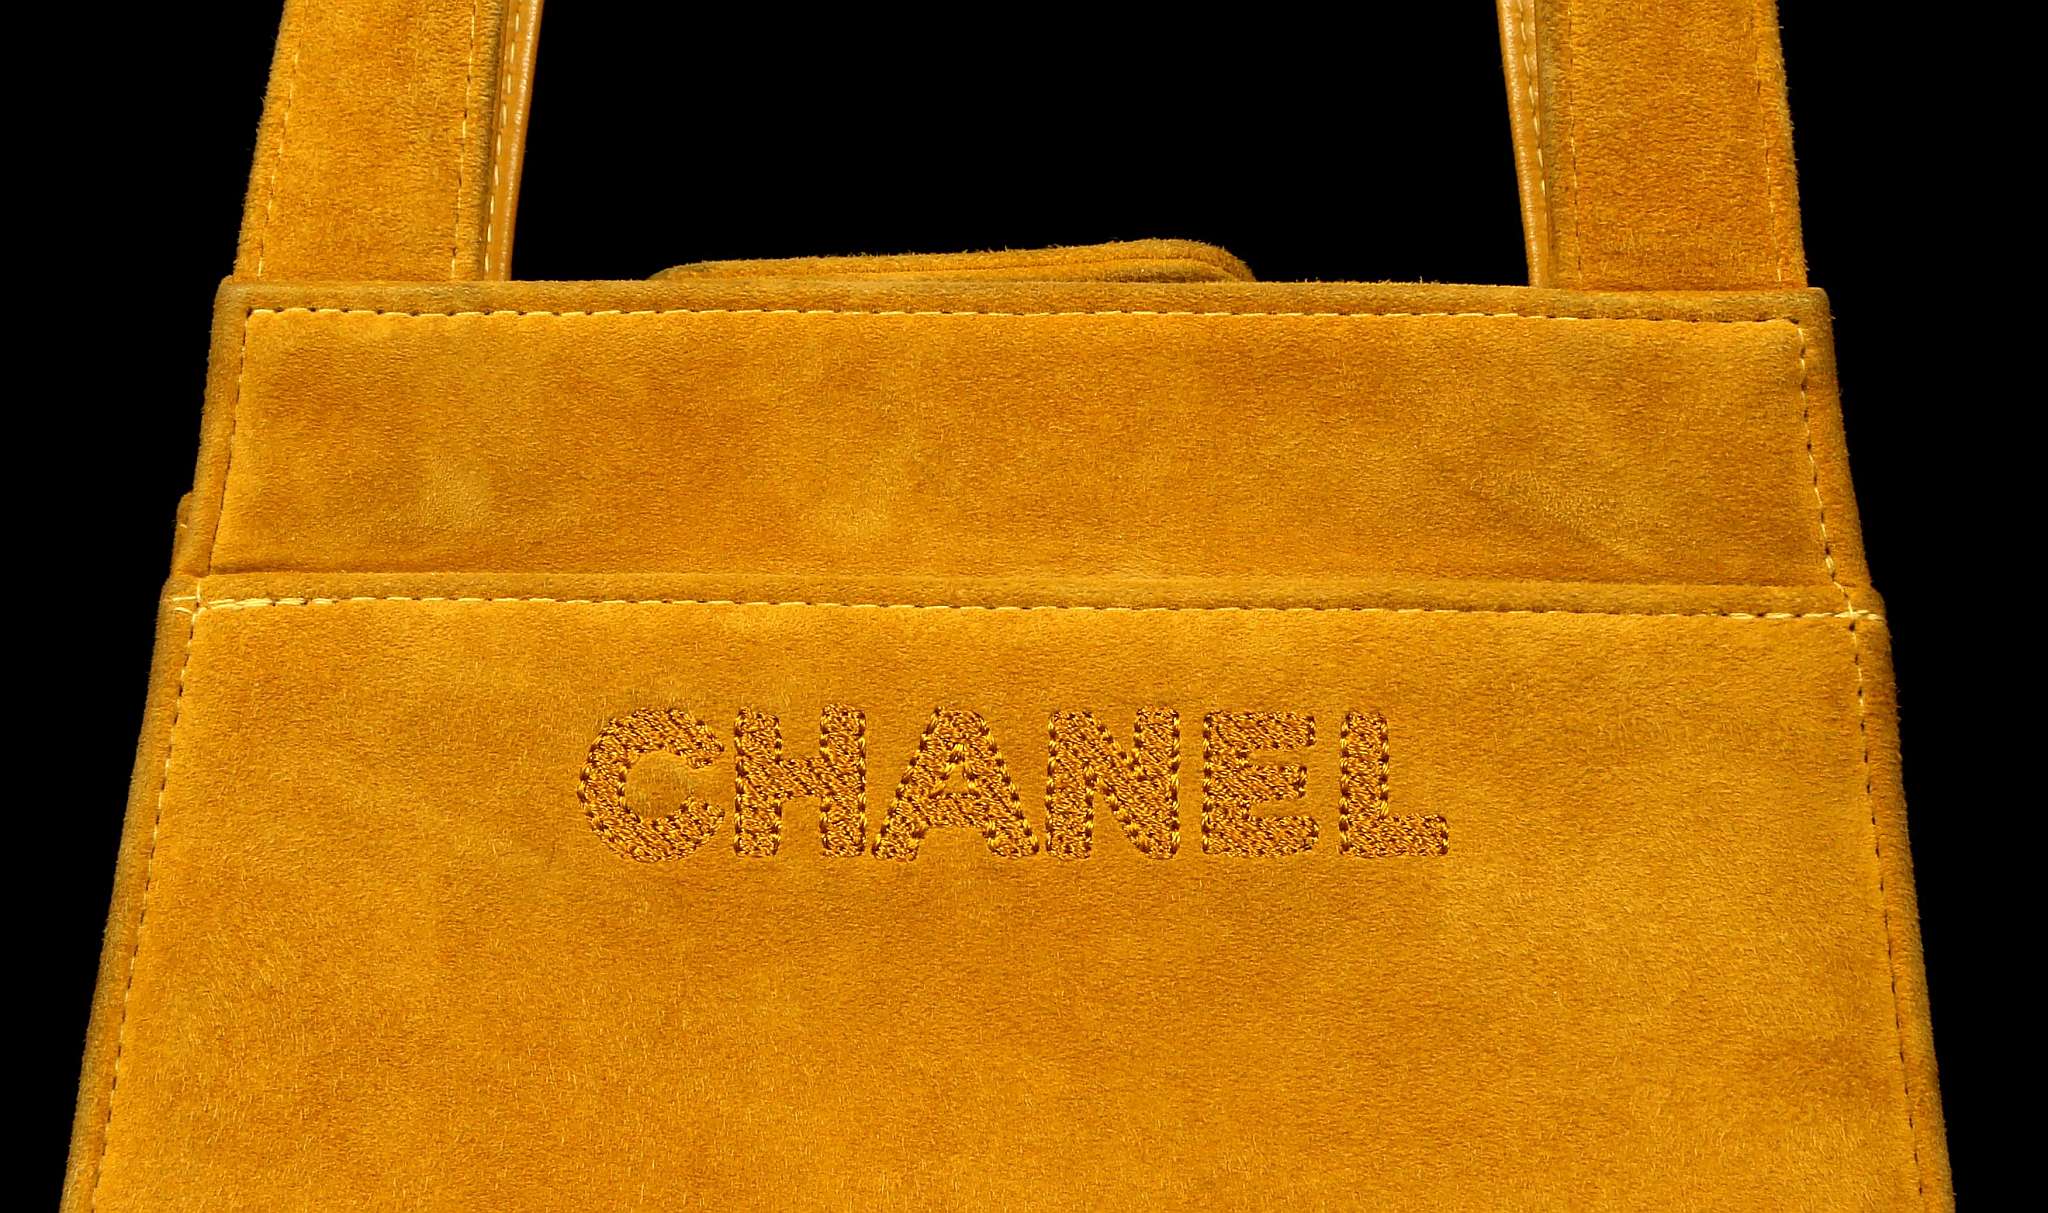 CHANEL EVENING BAG, date code for 1998, mustard ye - Image 3 of 8